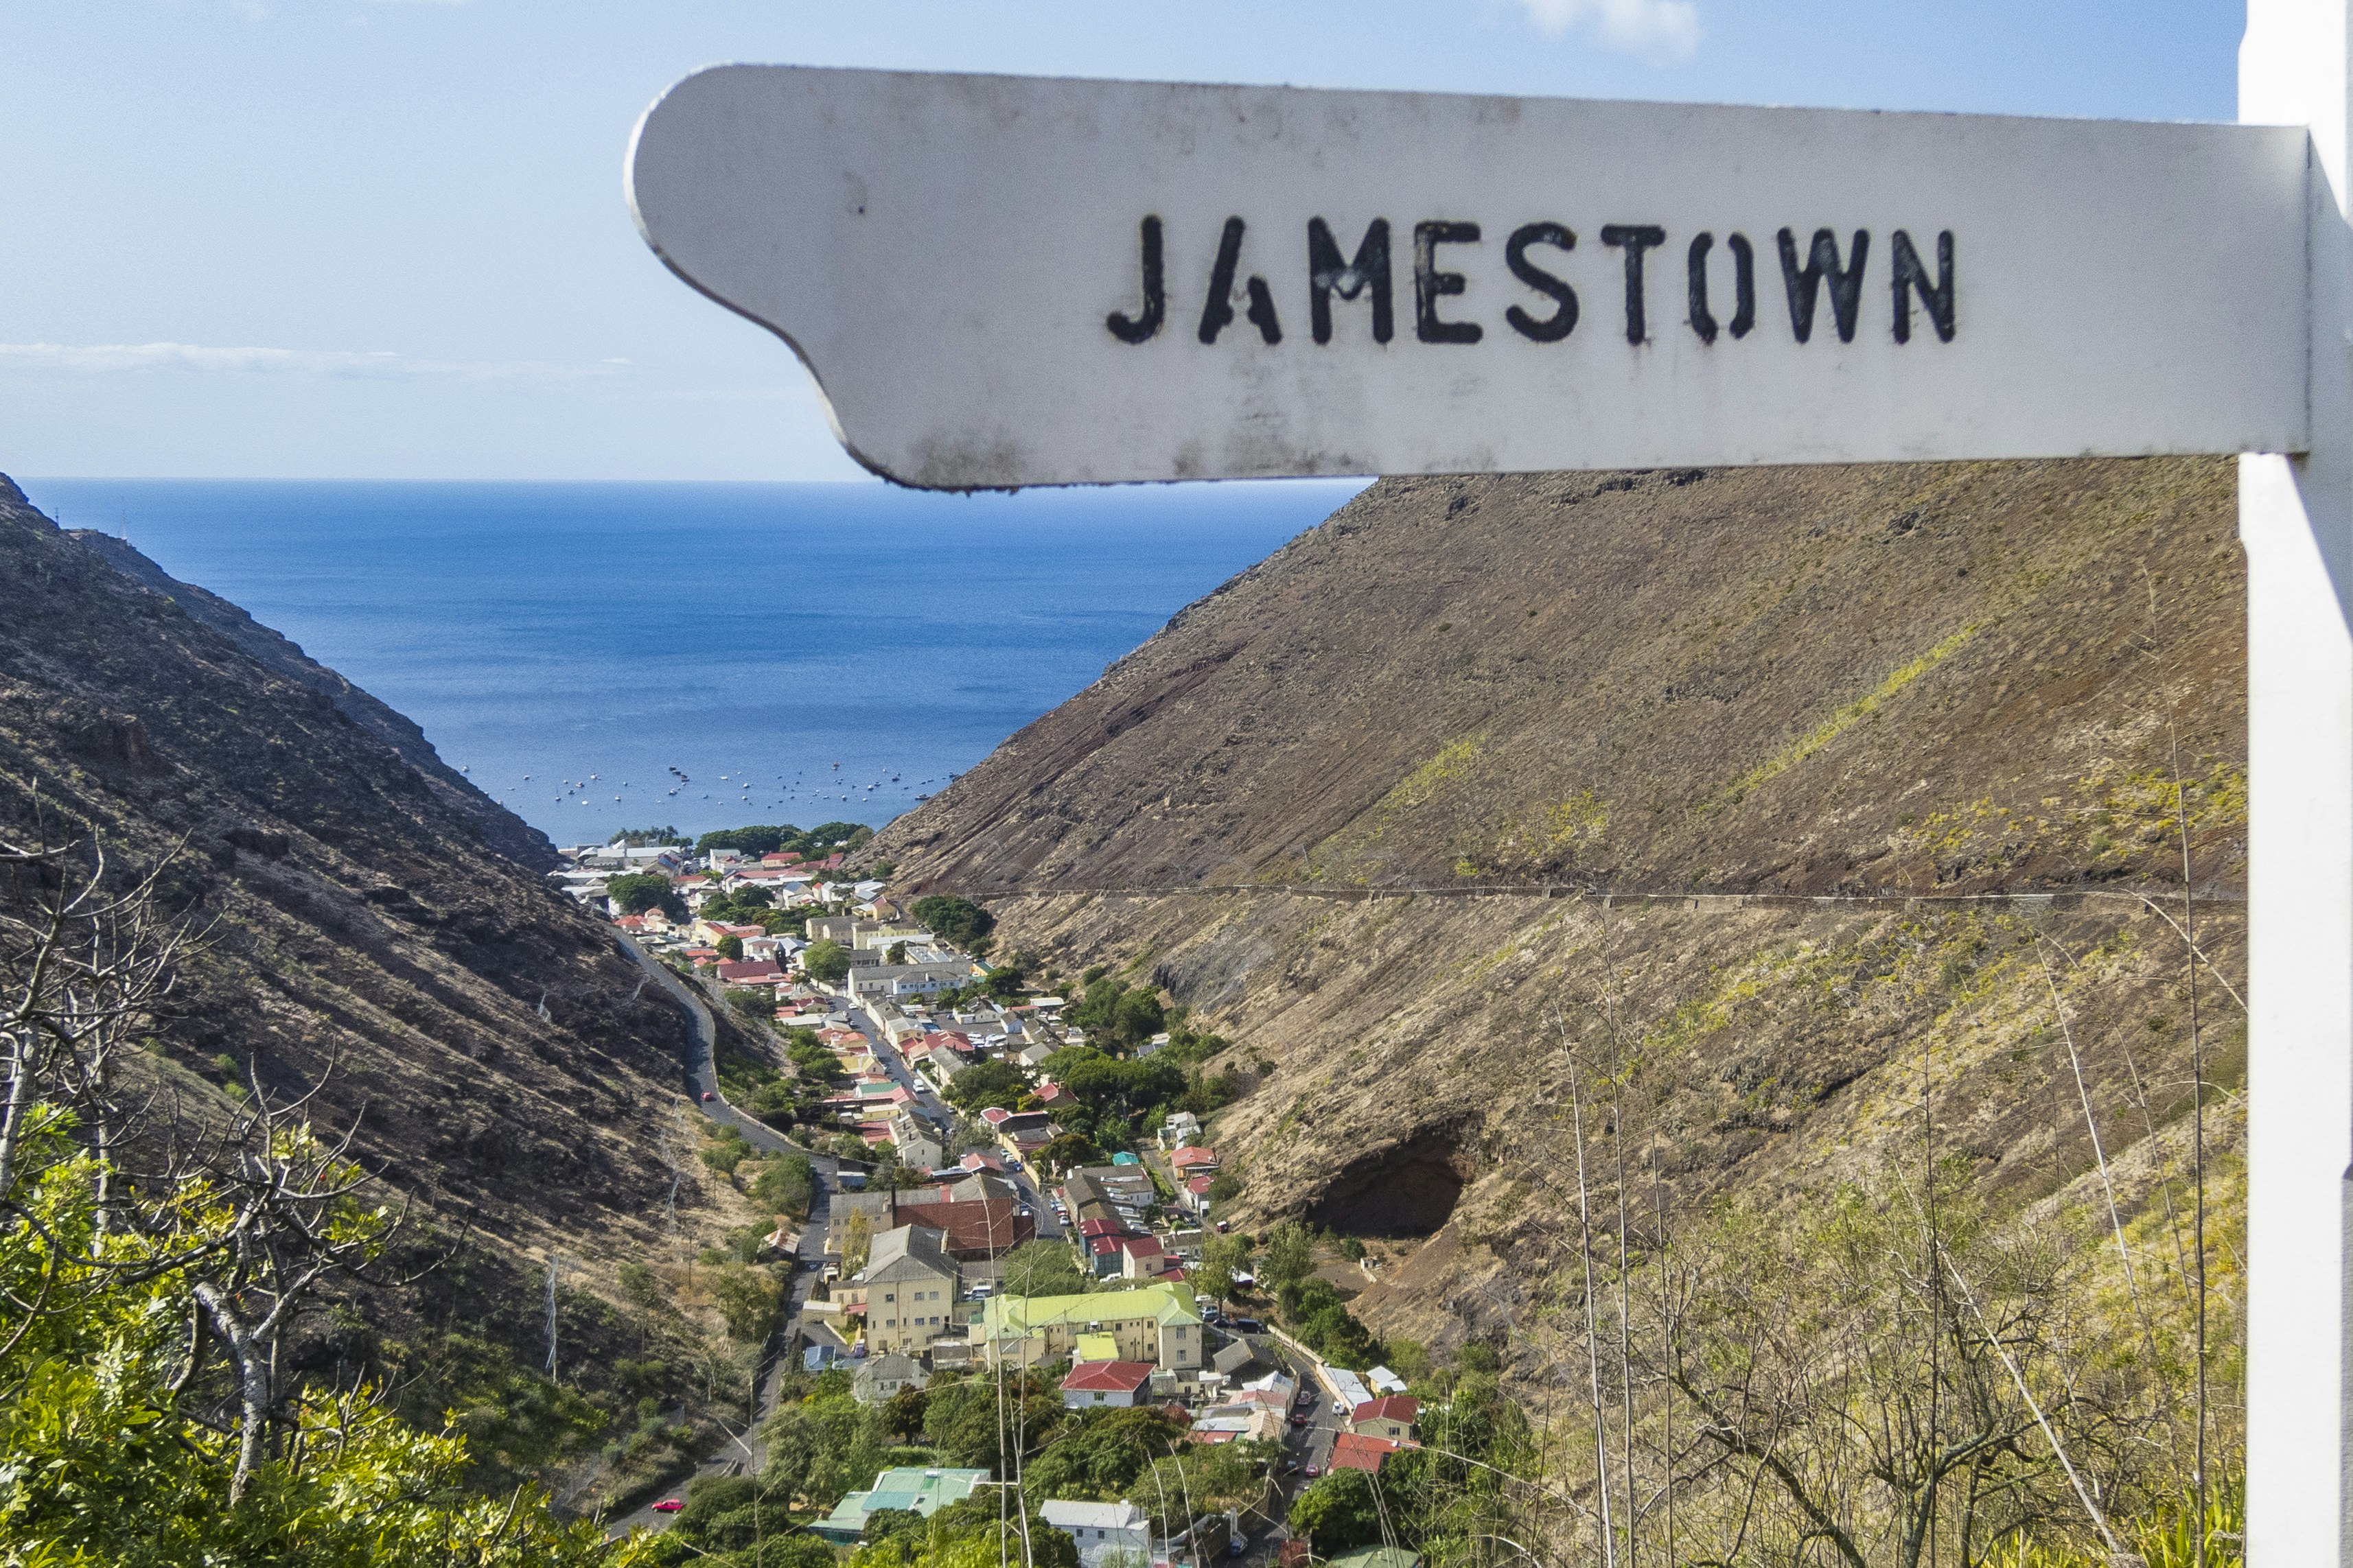 A cute hand-like white street sign reading 'Jamestown' hangs from a pole; the horizon on the Atlantic Ocean sits just below the sign, and below that is the town of Jamestown nestled between two steep slopes.